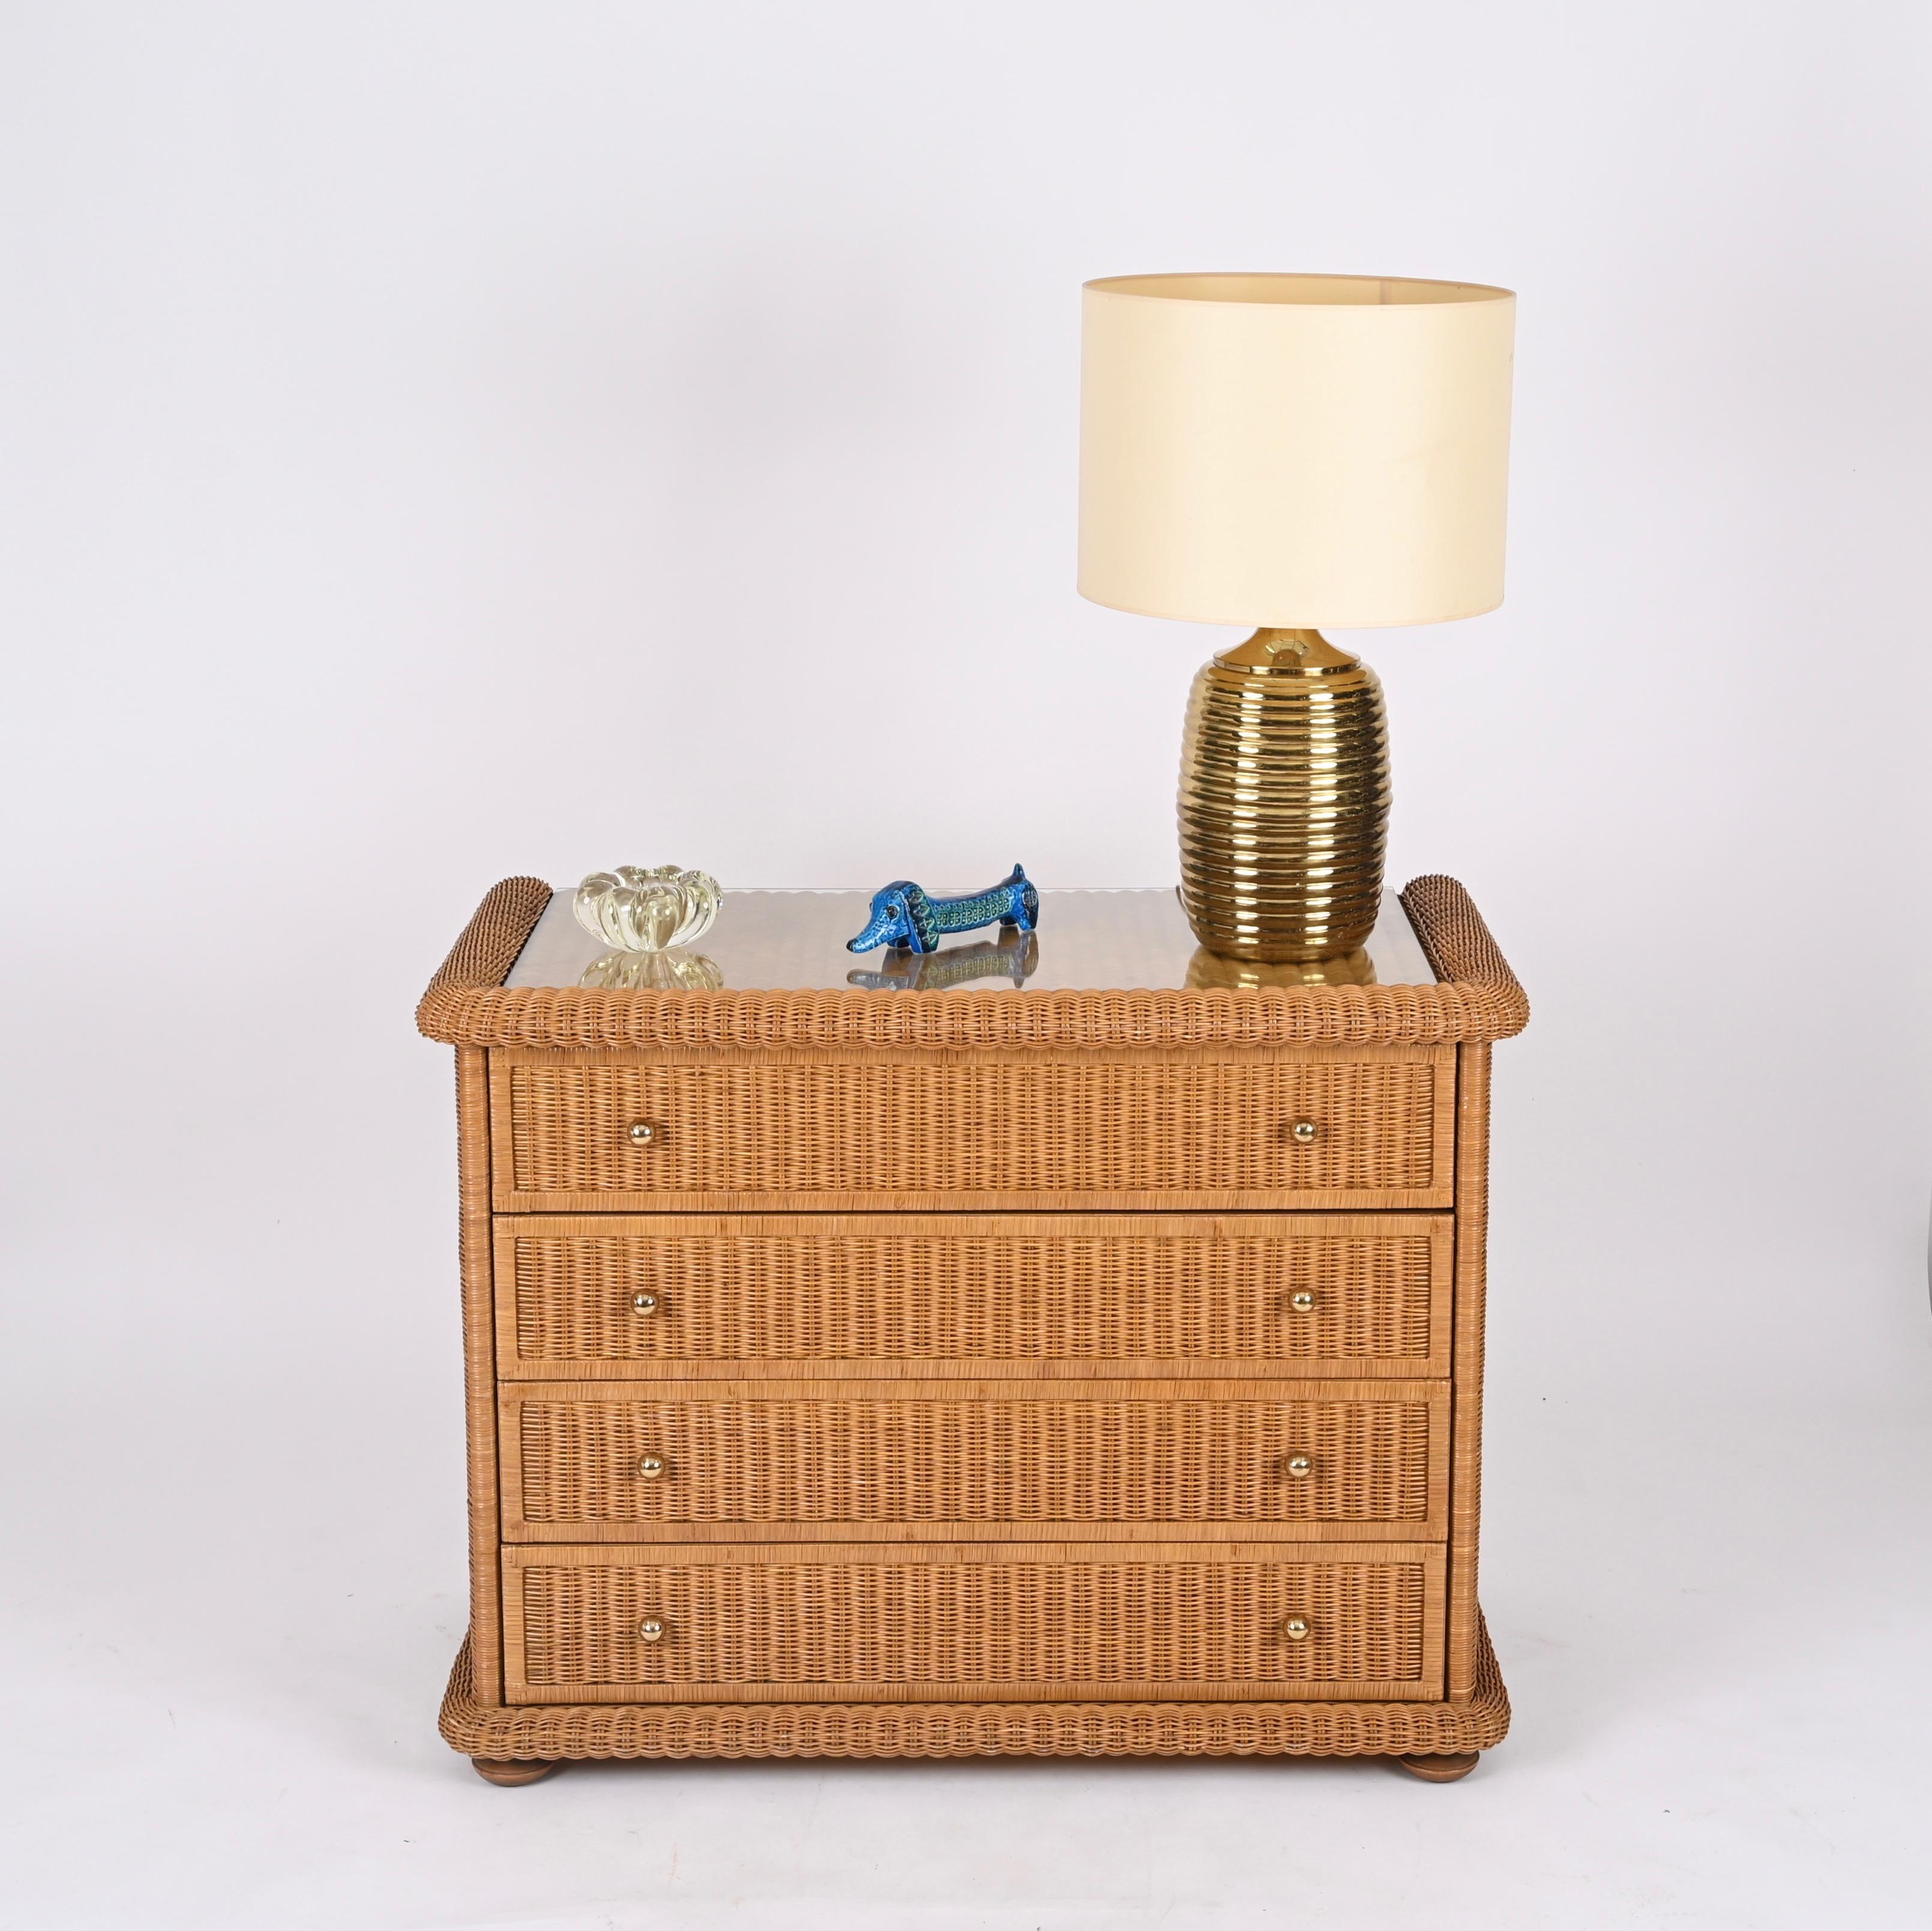 Stunning Mid-century French Riviera style chest of drawers fully made in woven rattan with brass knobs and a top crystal glass. This incredibly charming piece was made by Vivai del Sud, in Italy during the 1970s. 

The key feature of the beauty of